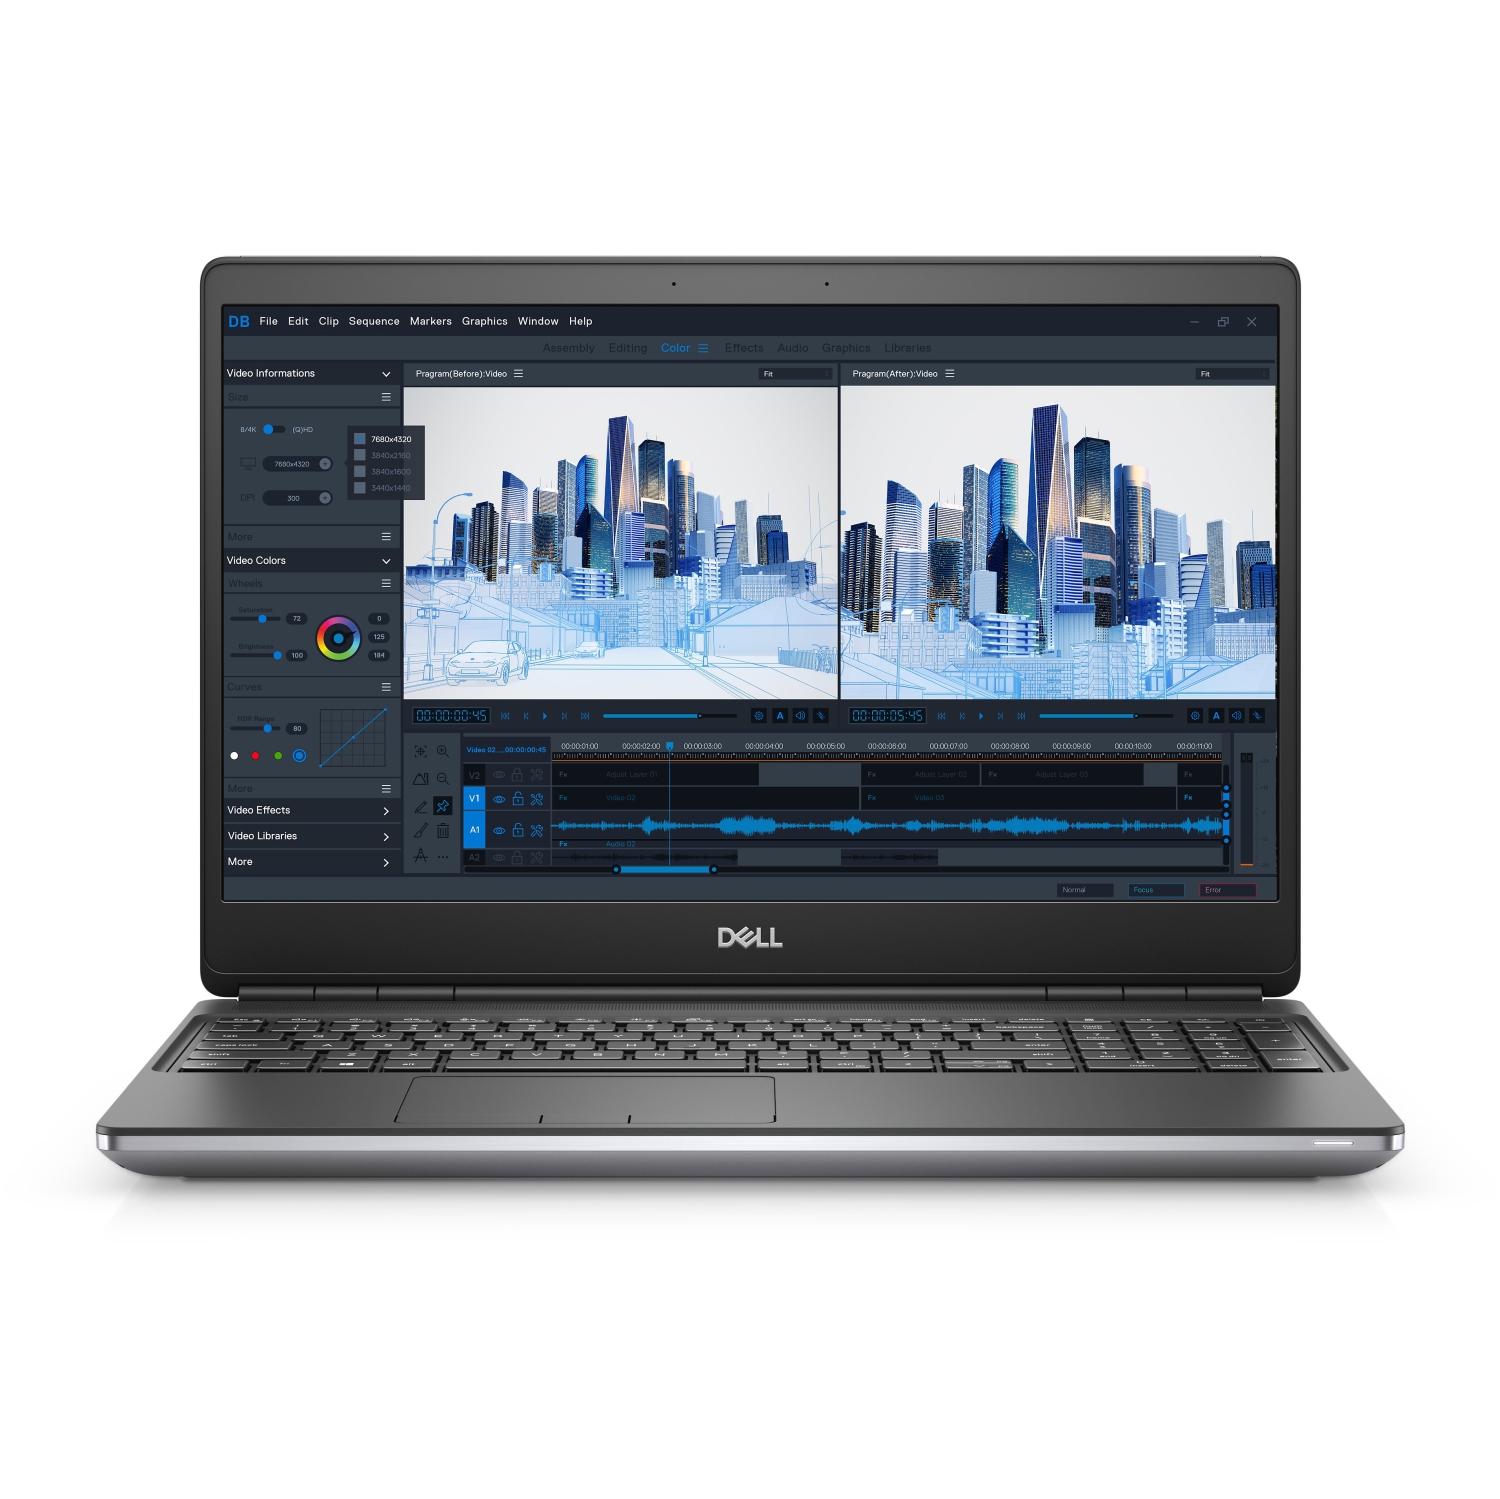 Refurbished (Excellent) - Dell Precision 7000 7560 Workstation Laptop (2021), 15.6" FHD, Core i9, 512GB SSD, 64GB RAM, RTX A5000, 5 GHz, 11th Gen CPU Certified